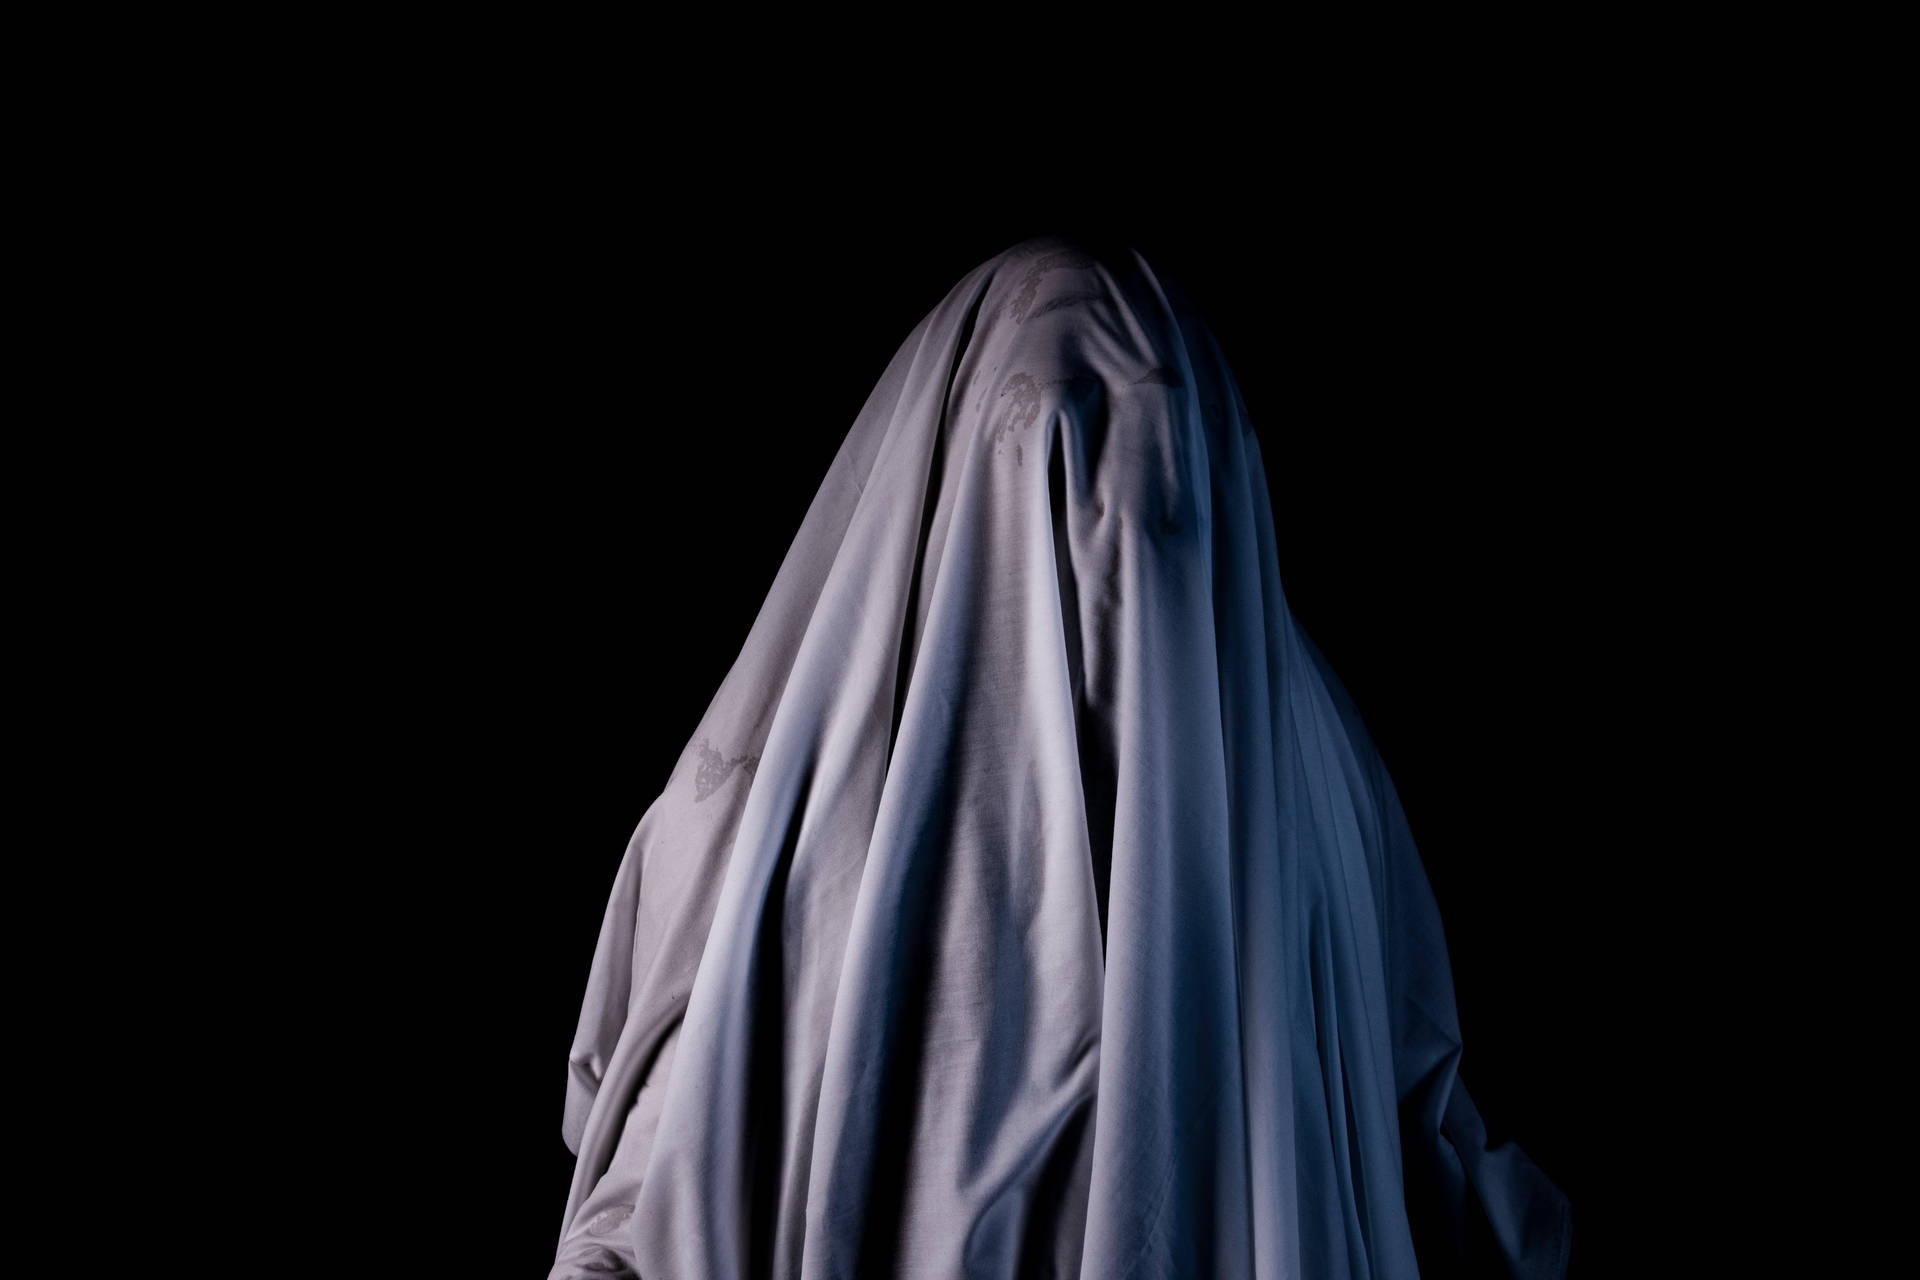 Ghost 5472X3648 Wallpaper and Background Image